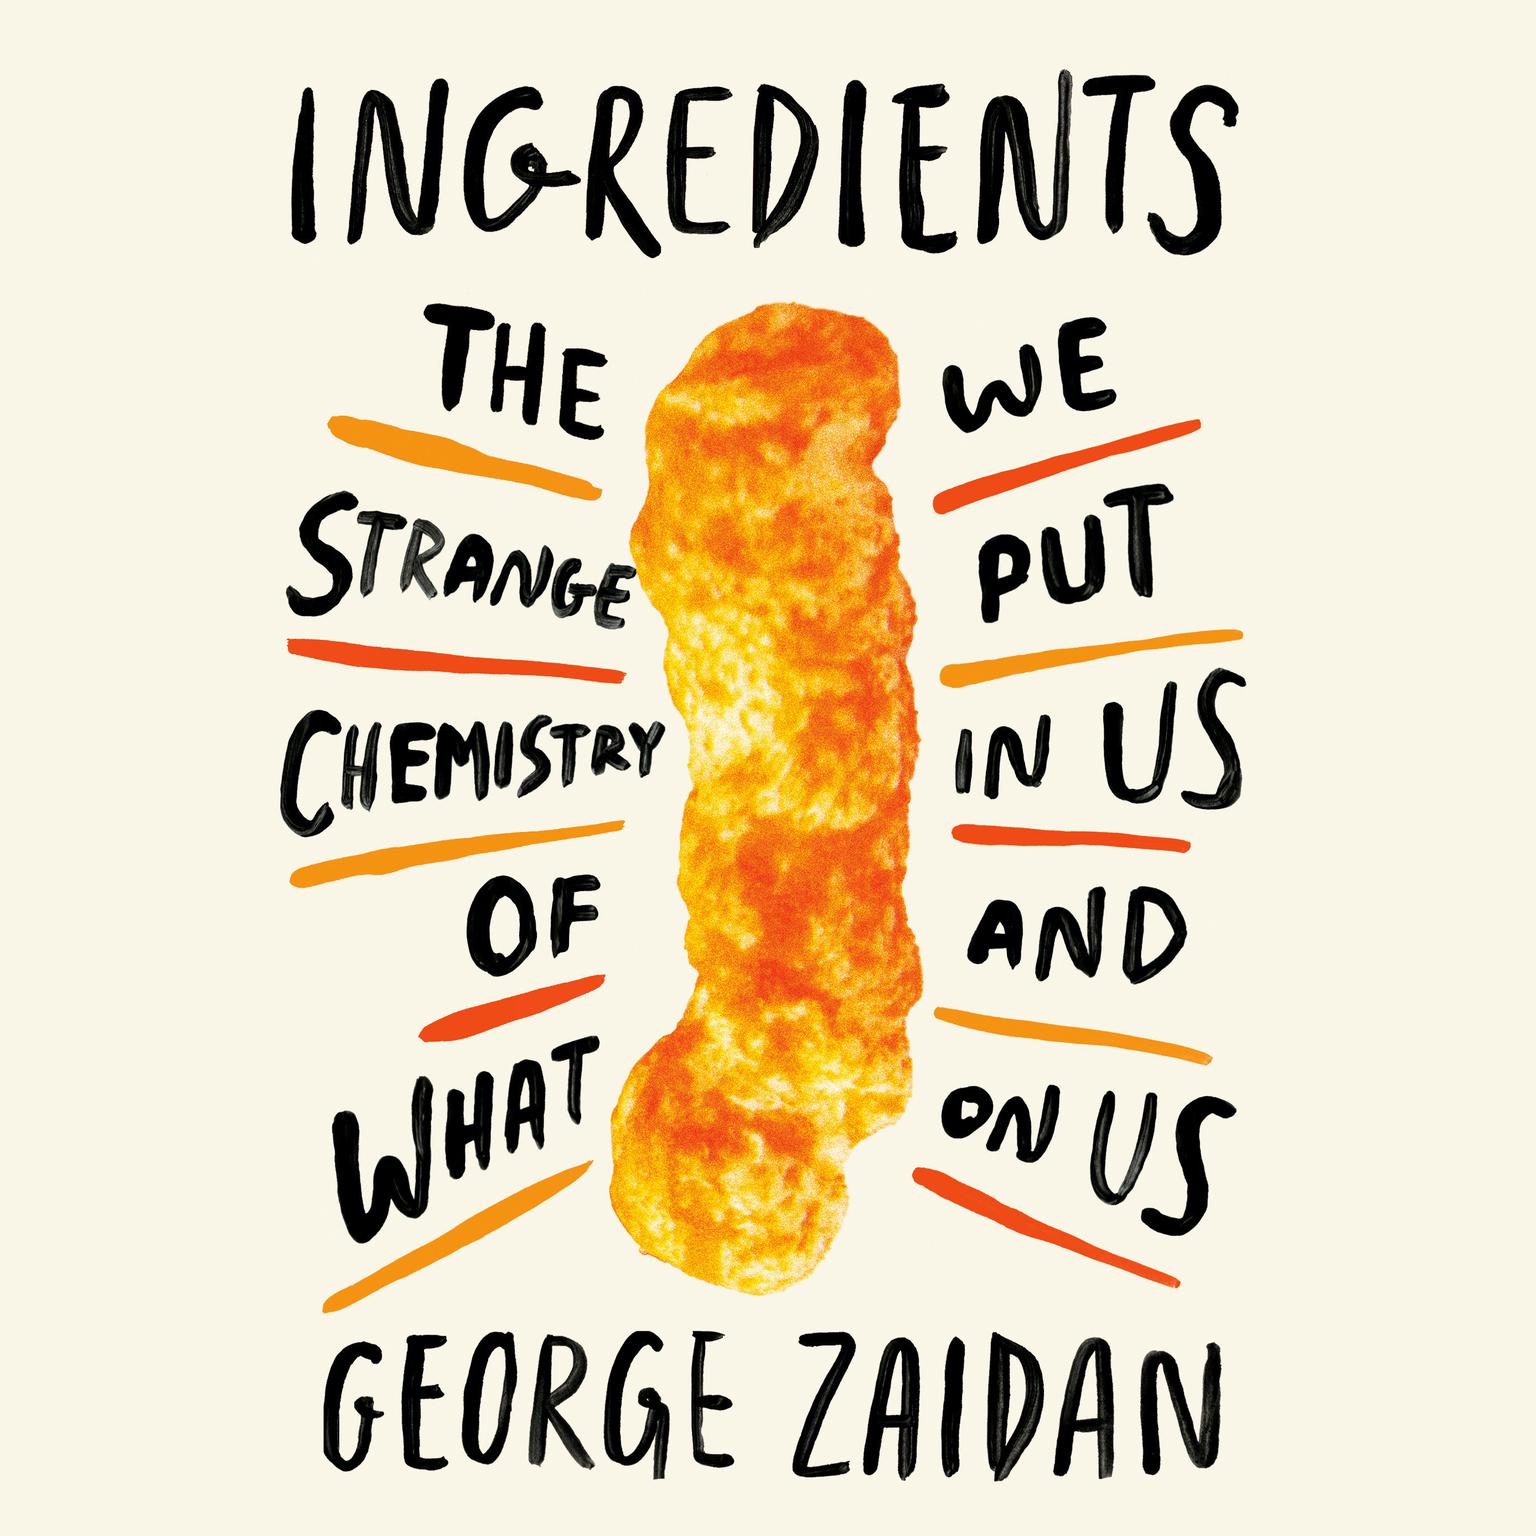 Ingredients: The Strange Chemistry of What We Put in Us and on Us Audiobook, by George Zaidan